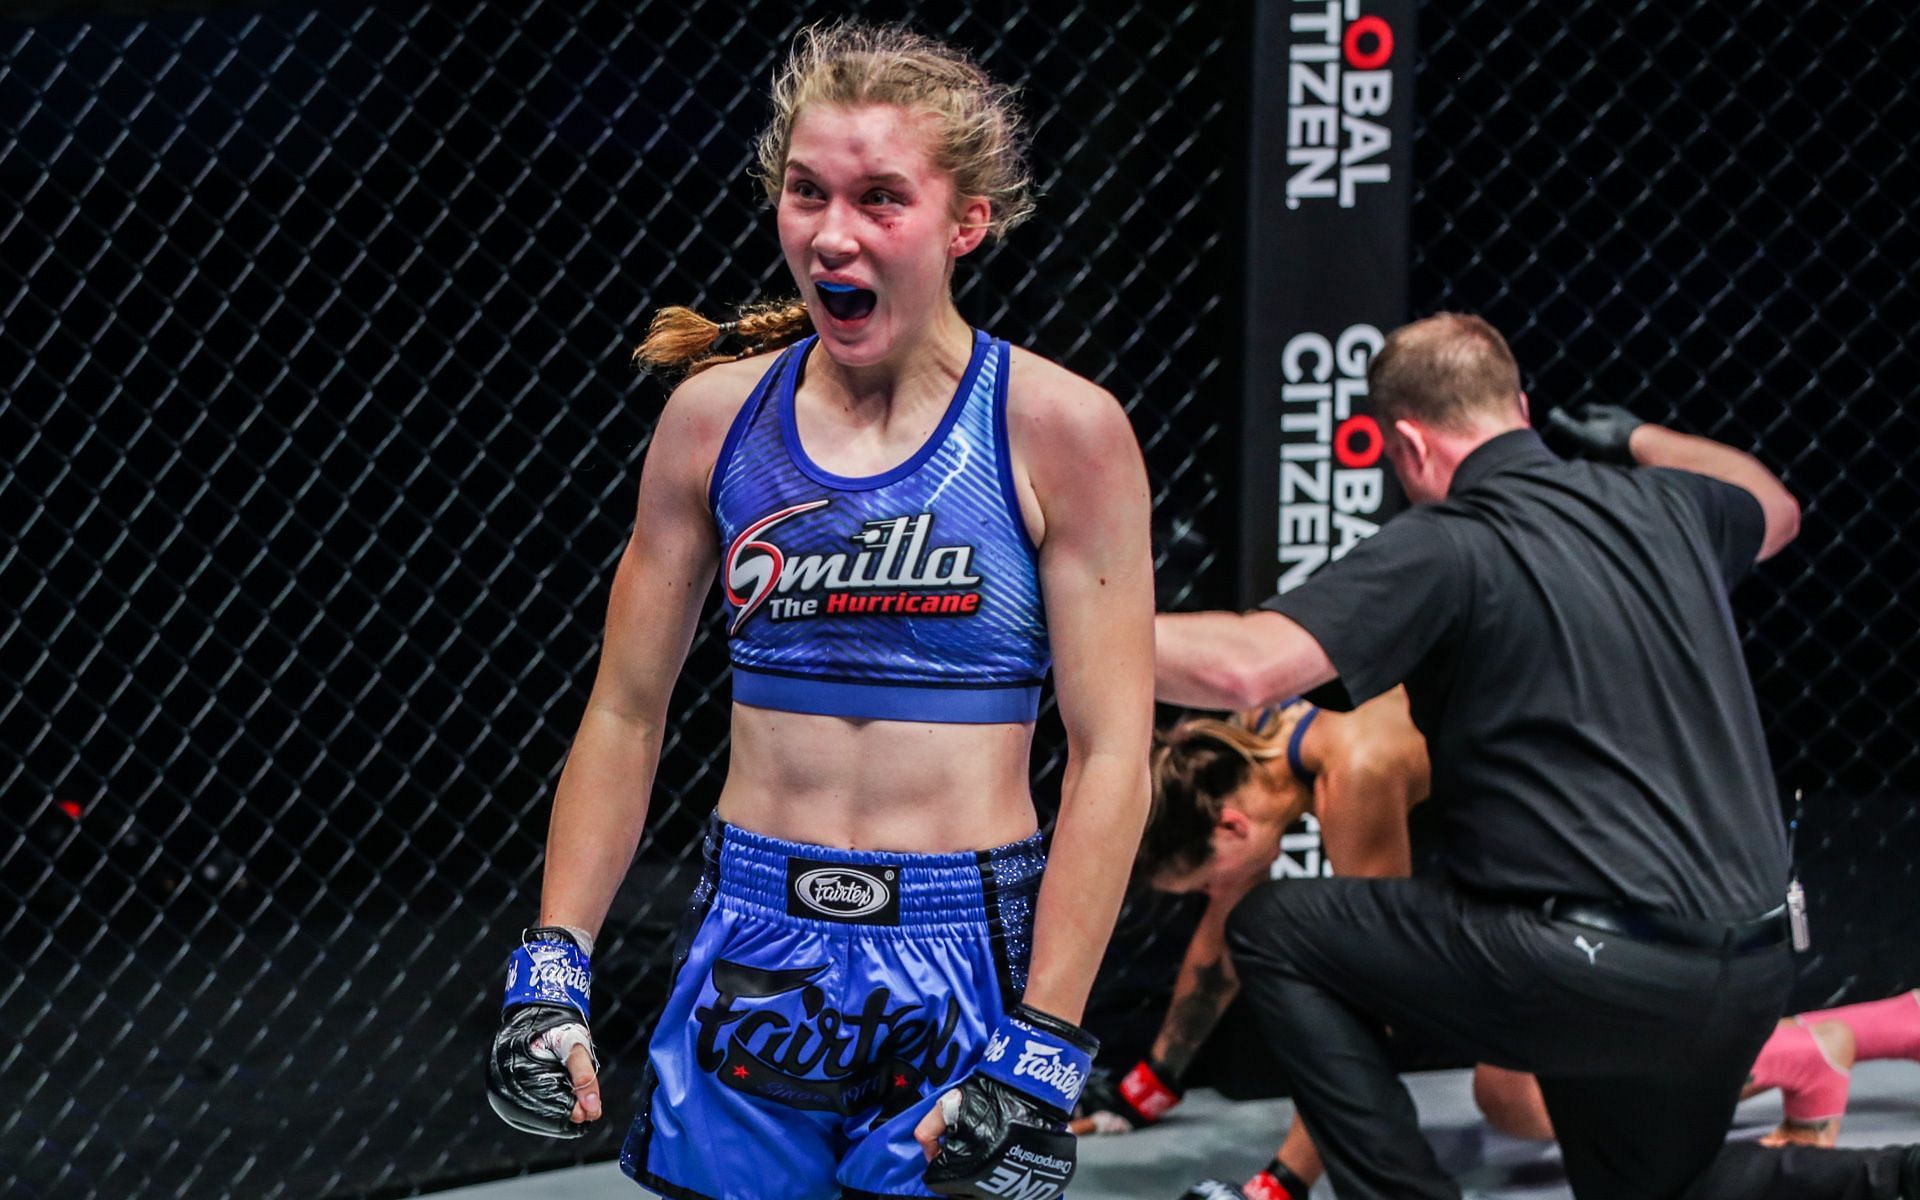 Smilla Sundell says her family has always been her biggest supporter in her fighting career. [Photos ONE Championship]